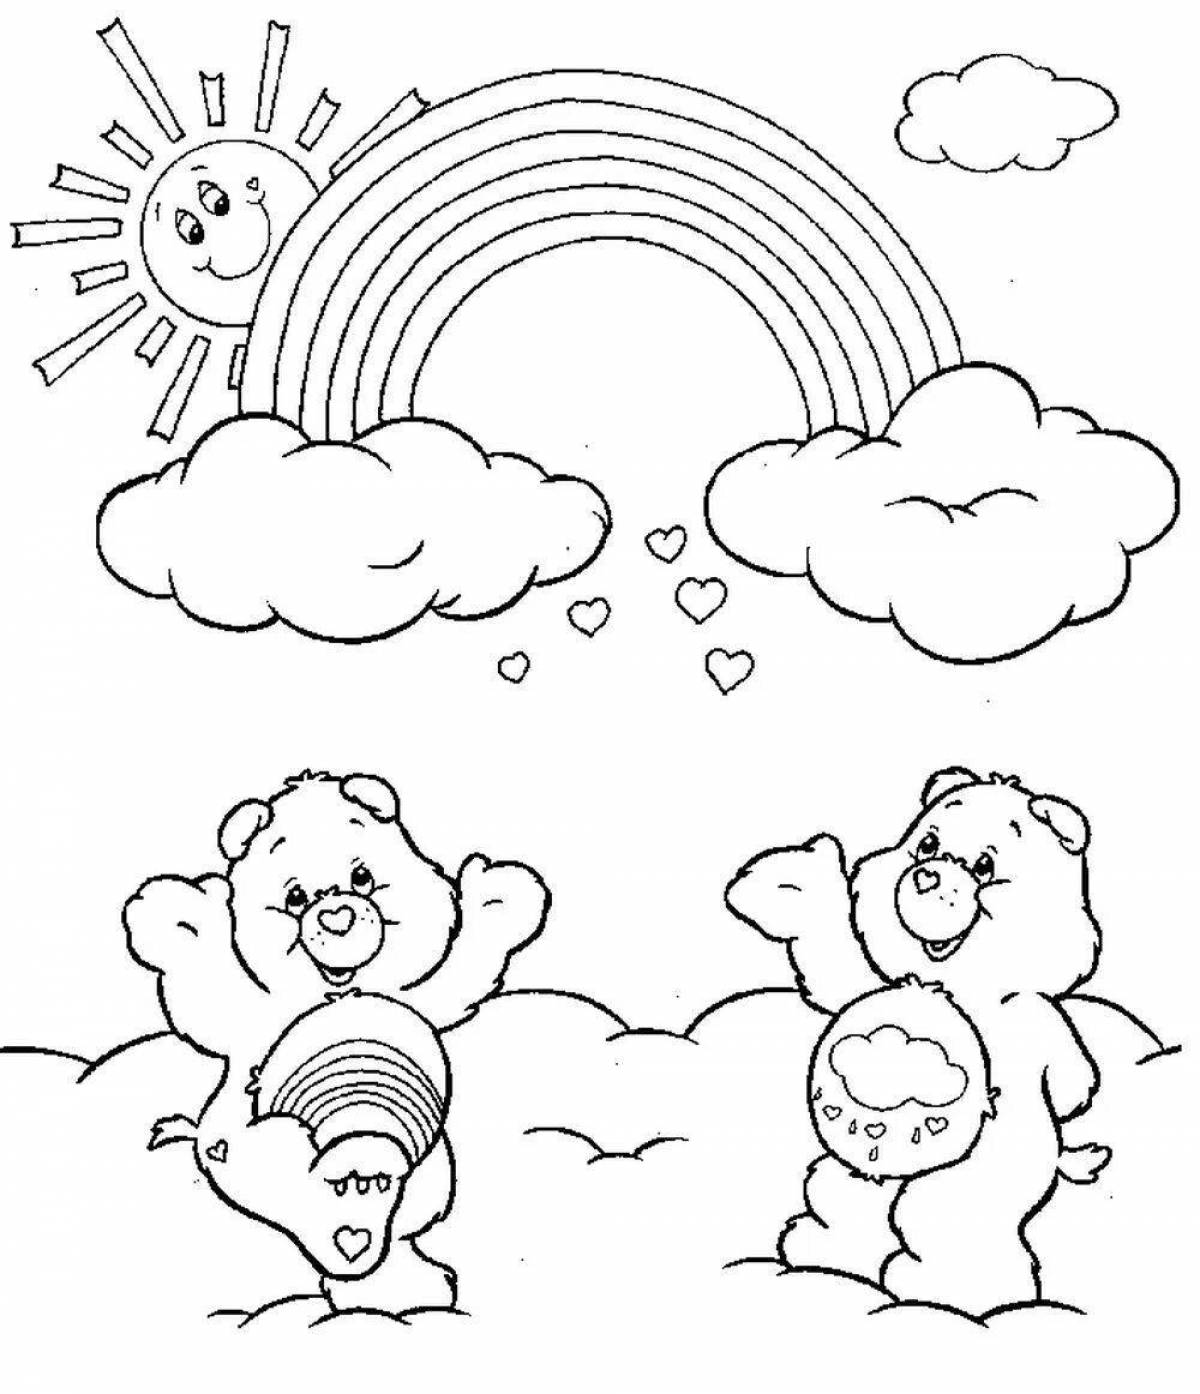 Large rainbow coloring book for kids